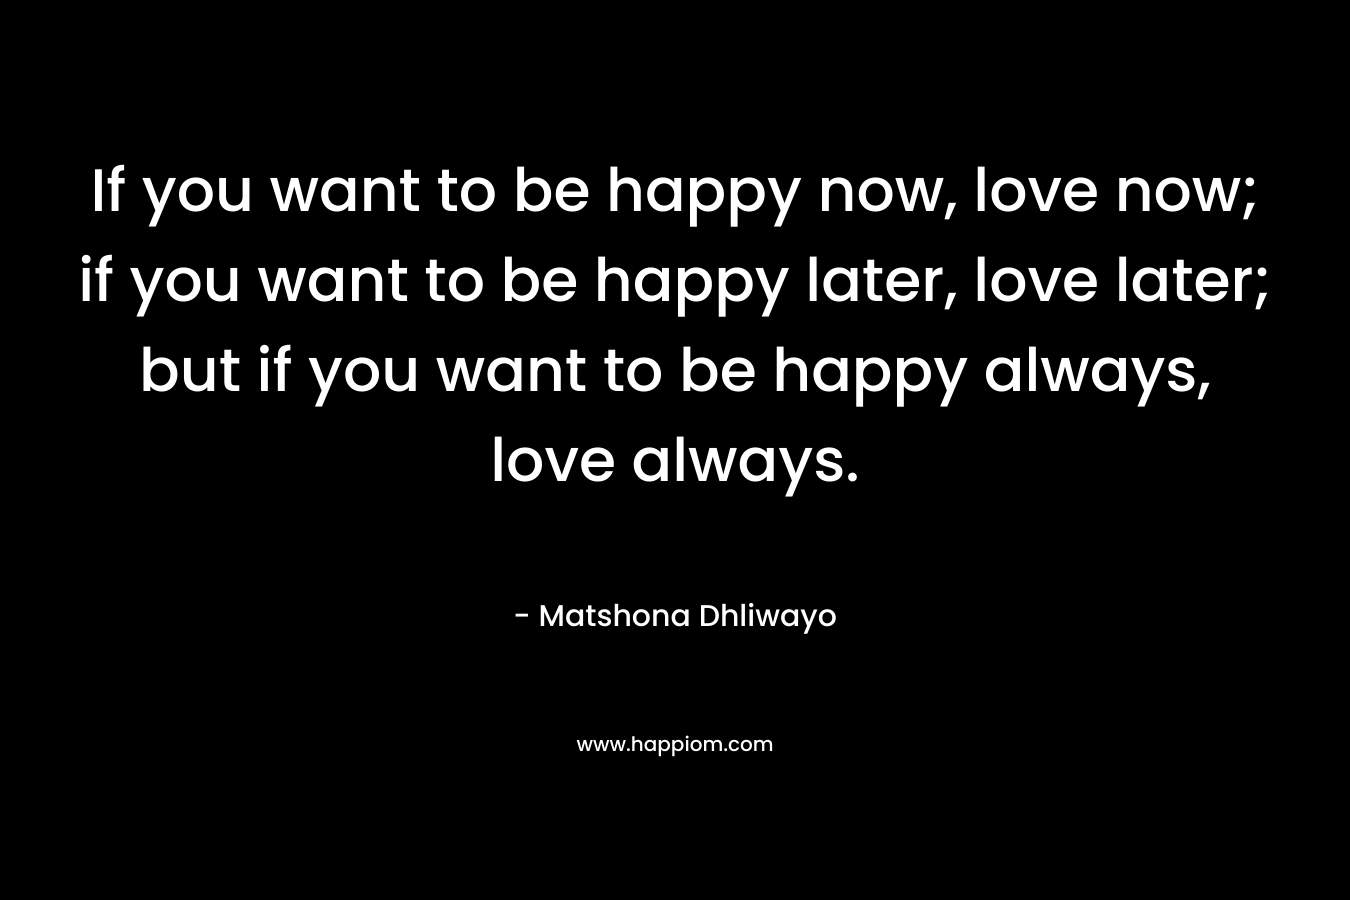 If you want to be happy now, love now; if you want to be happy later, love later; but if you want to be happy always, love always.